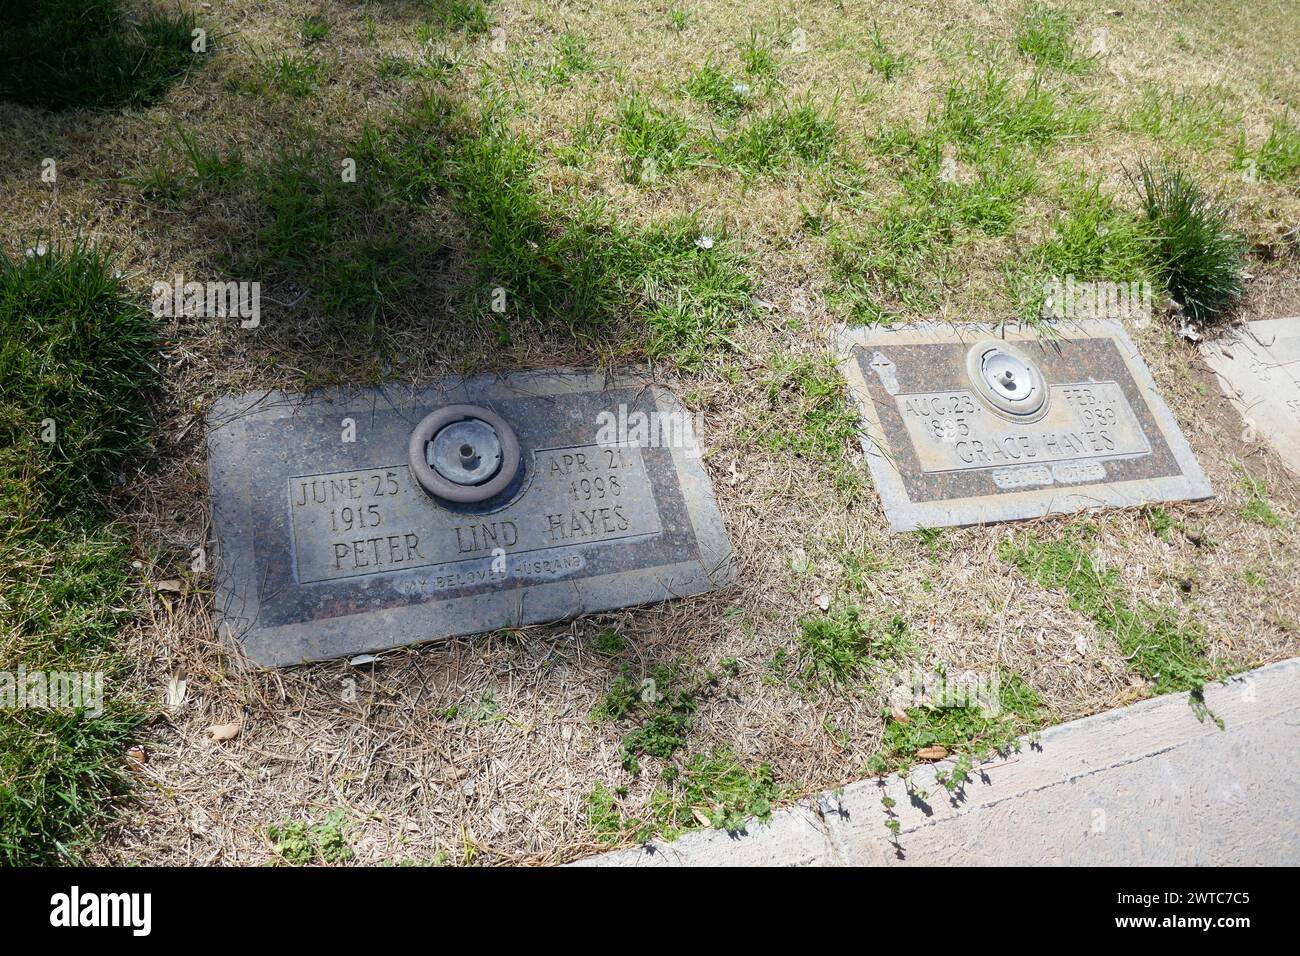 Las Vegas, Nevada, USA 8th March 2024 Actor Peter Lind Hayes Grave, wife Actress Mary Healy Grave and his mother Grace Hayes Grave in Garden of Resurrection at Palm Memorial Park on March 8, 2024 in Las Vegas, Nevada, USA. Photo by Barry King/Alamy Stock Photo Stock Photo